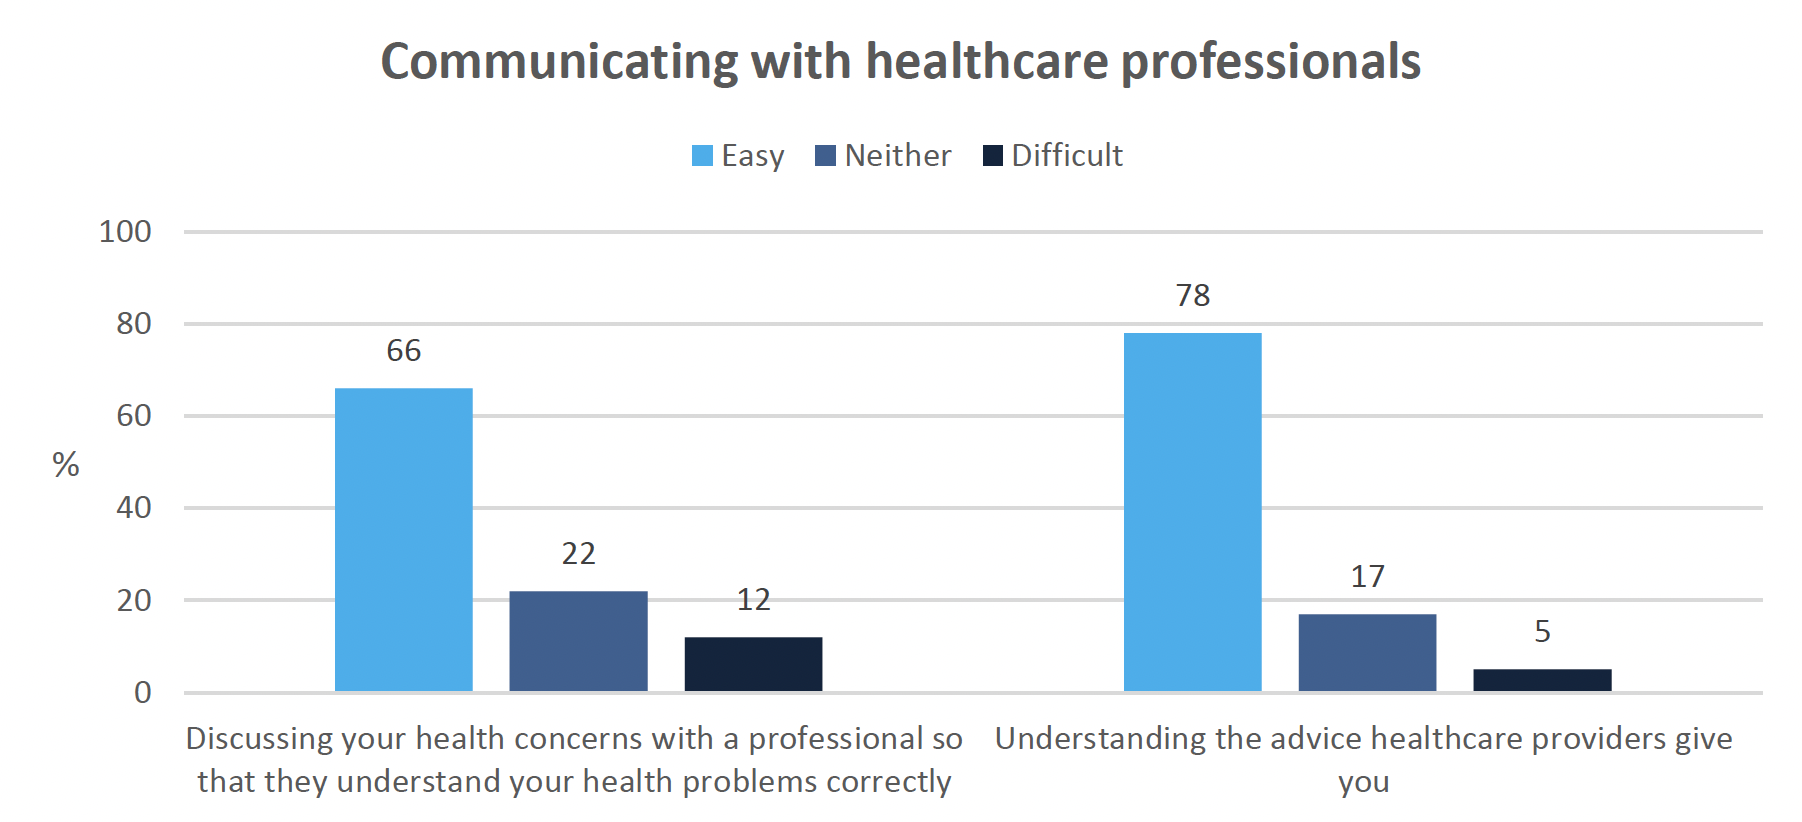 Double vertical bar graph showing ease and understanding communicating with healthcare professionals
This double vertical bar graph asks respondents about communication and understanding between patients and healthcare professionals. The first question asks whether how easy or difficult respondents felt discussing their health problems so that they were understood correctly, to which 66% of all respondents said they found it easy. The second question asks how easy or difficult respondents found understanding the advice given to them by their healthcare providers, to which 78% said they found it easy.